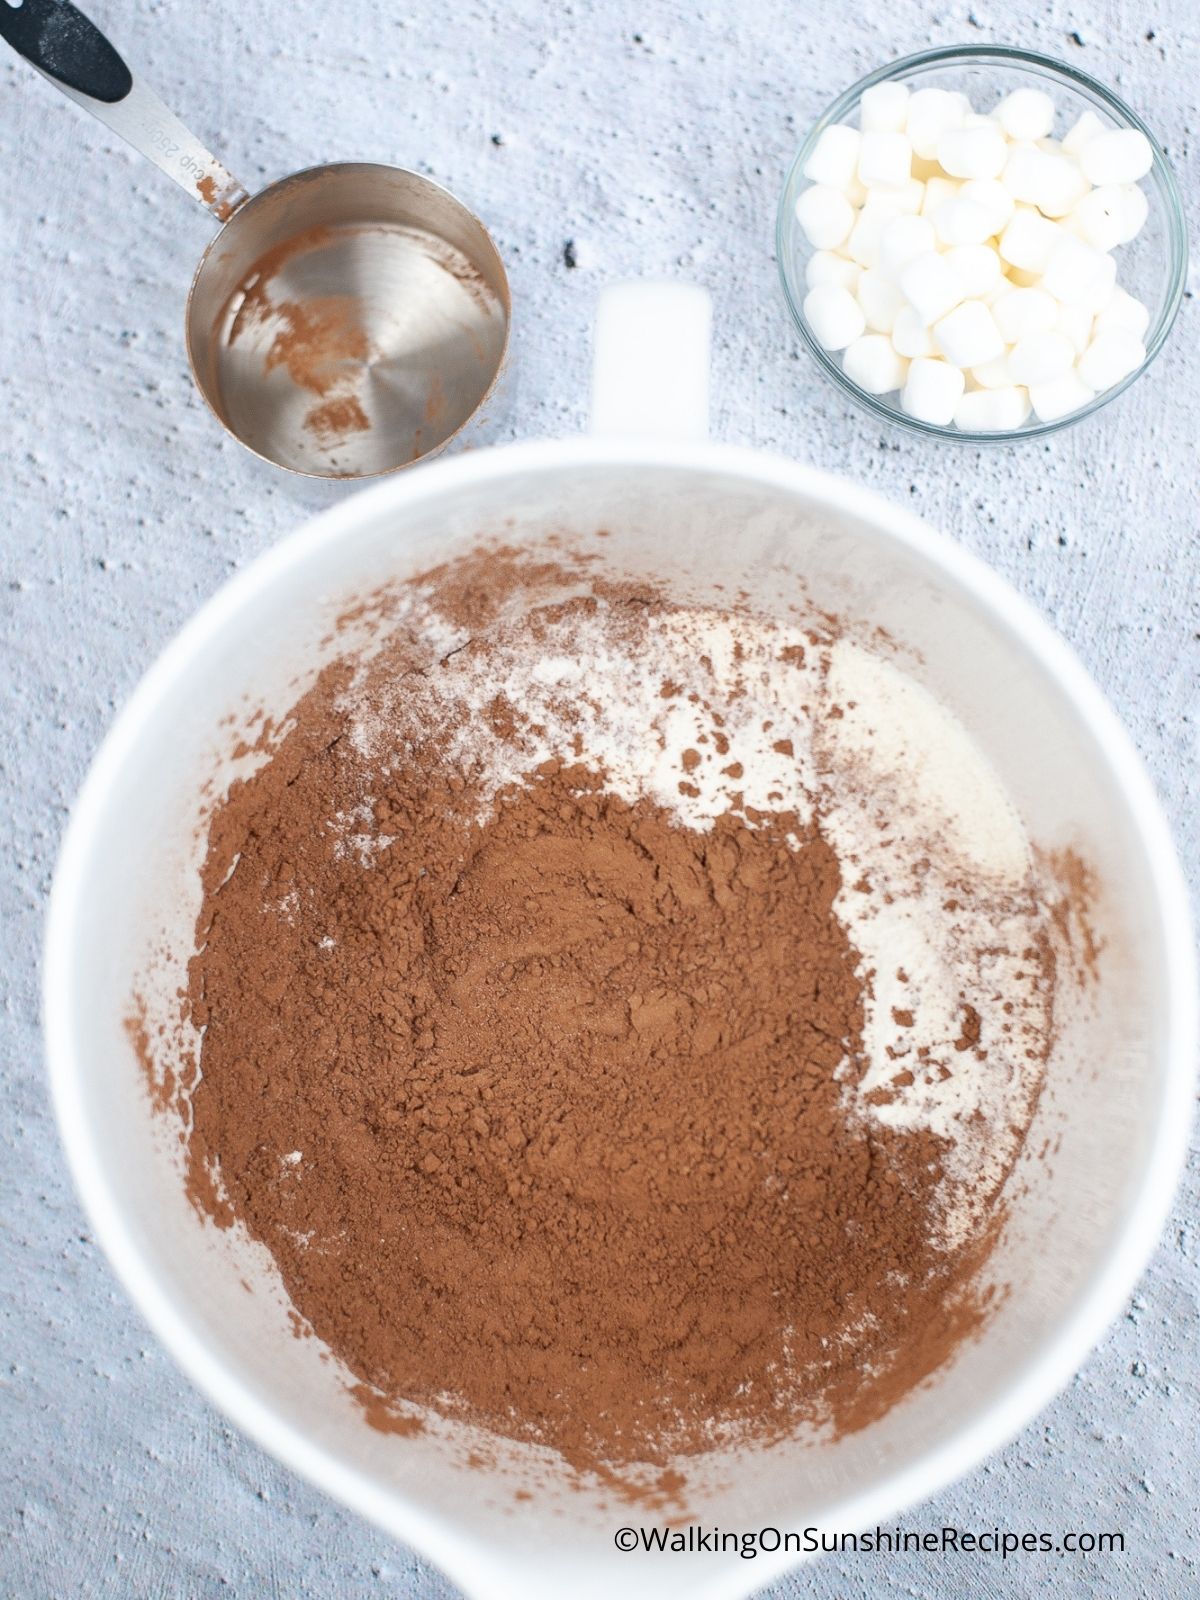 Add Ingredients together for mason jar hot cocoa recipe.